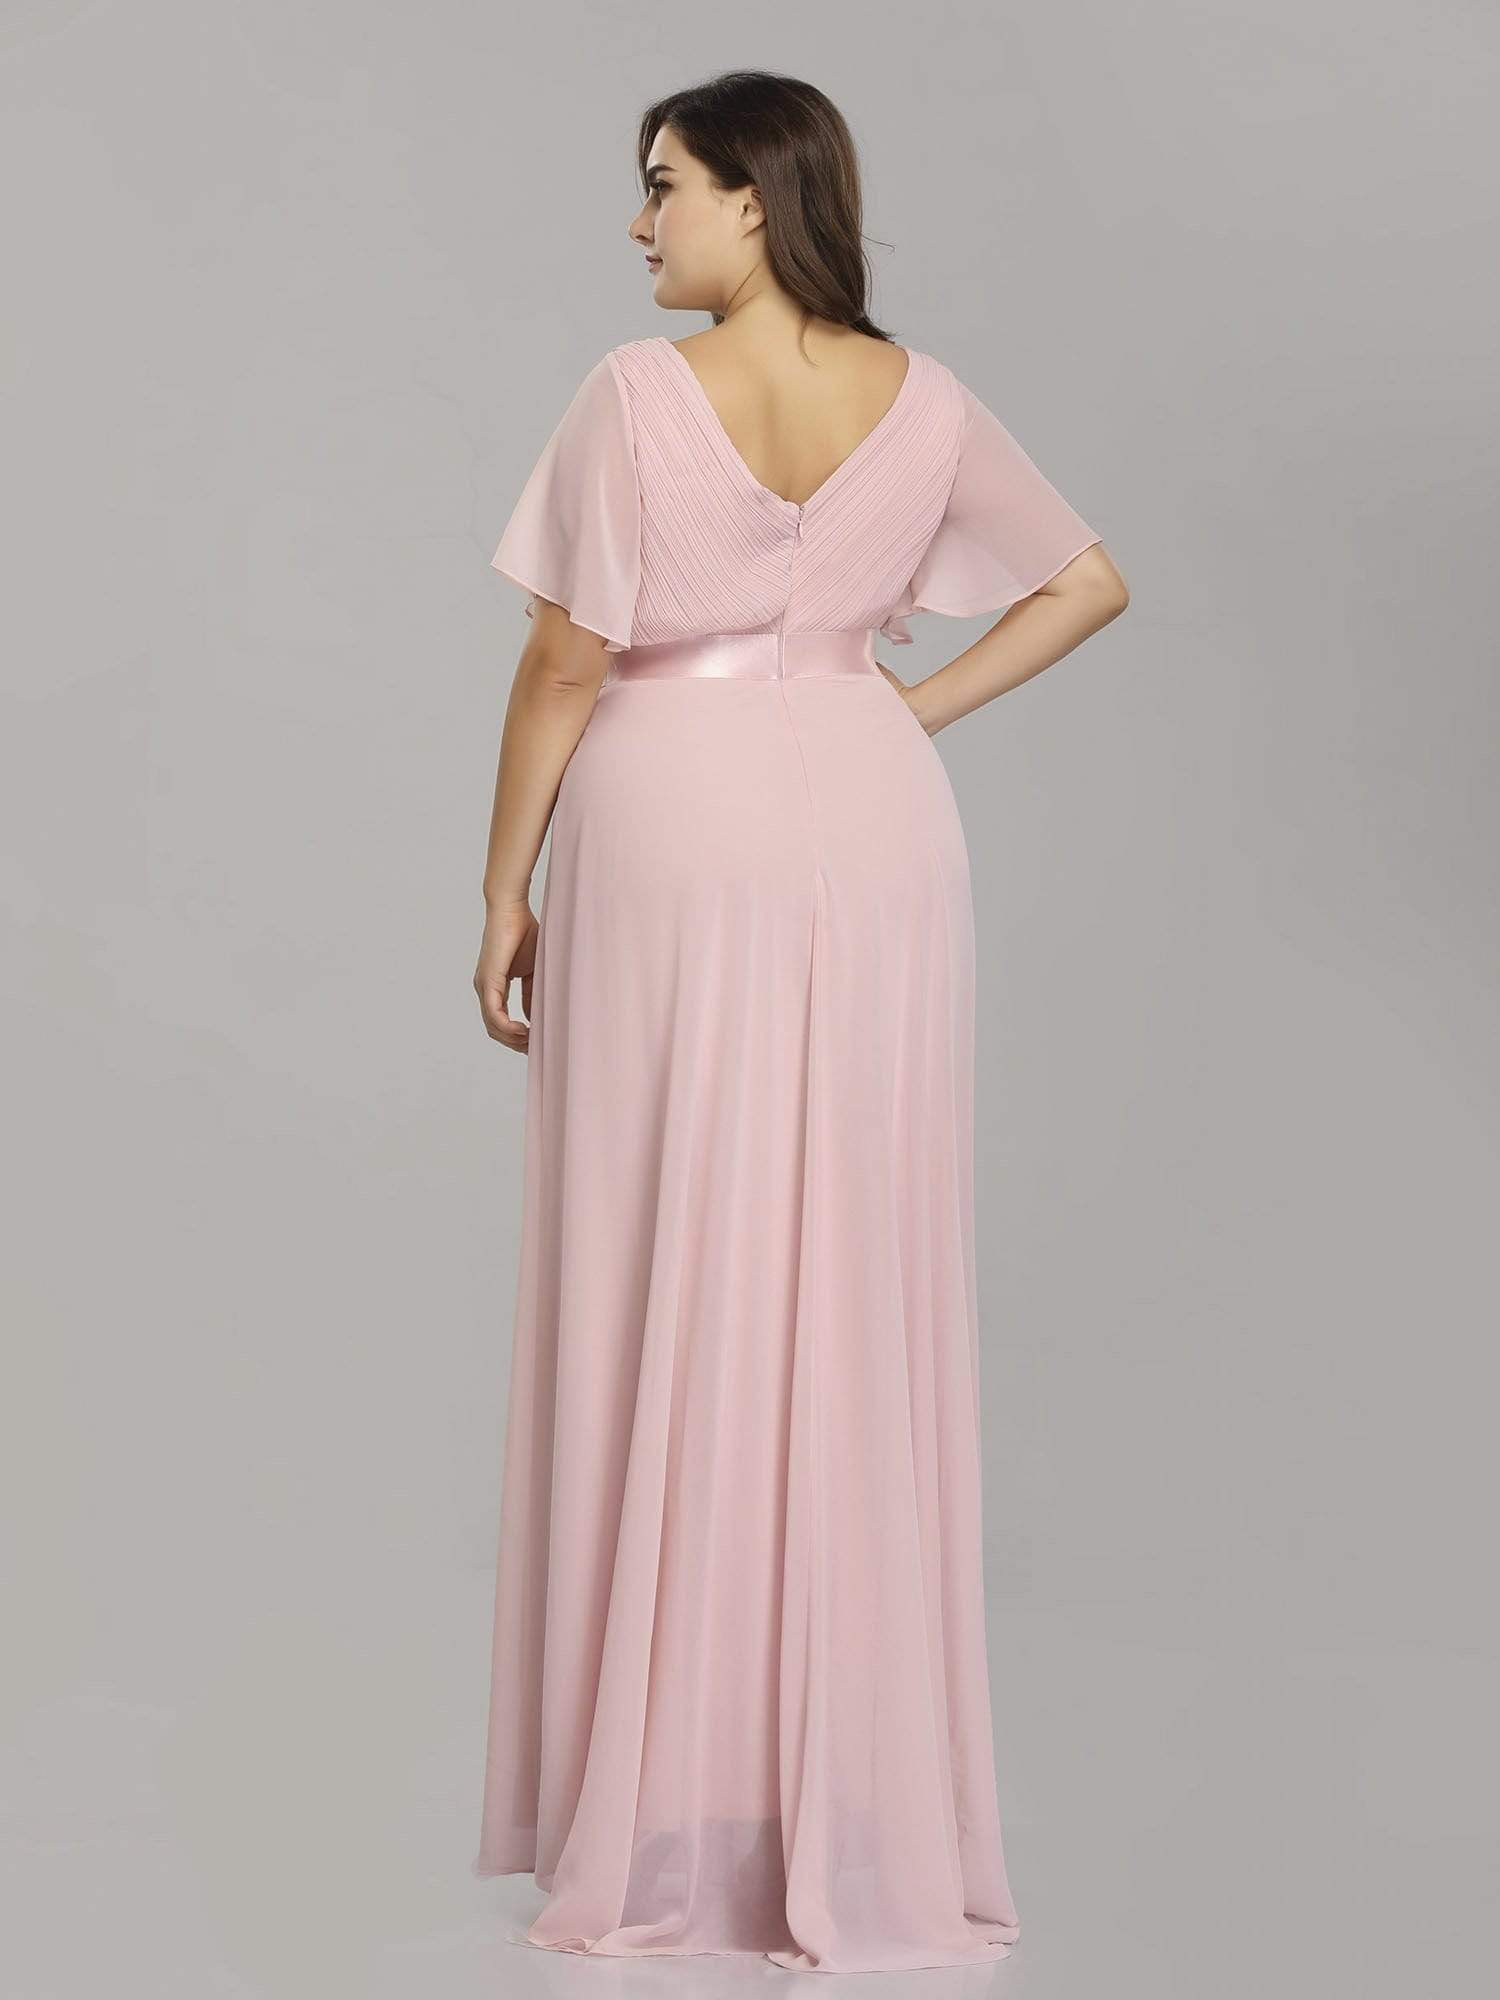 COLOR=Pink | Plus Size Long Empire Waist Evening Dress With Short Flutter Sleeves-Pink 4